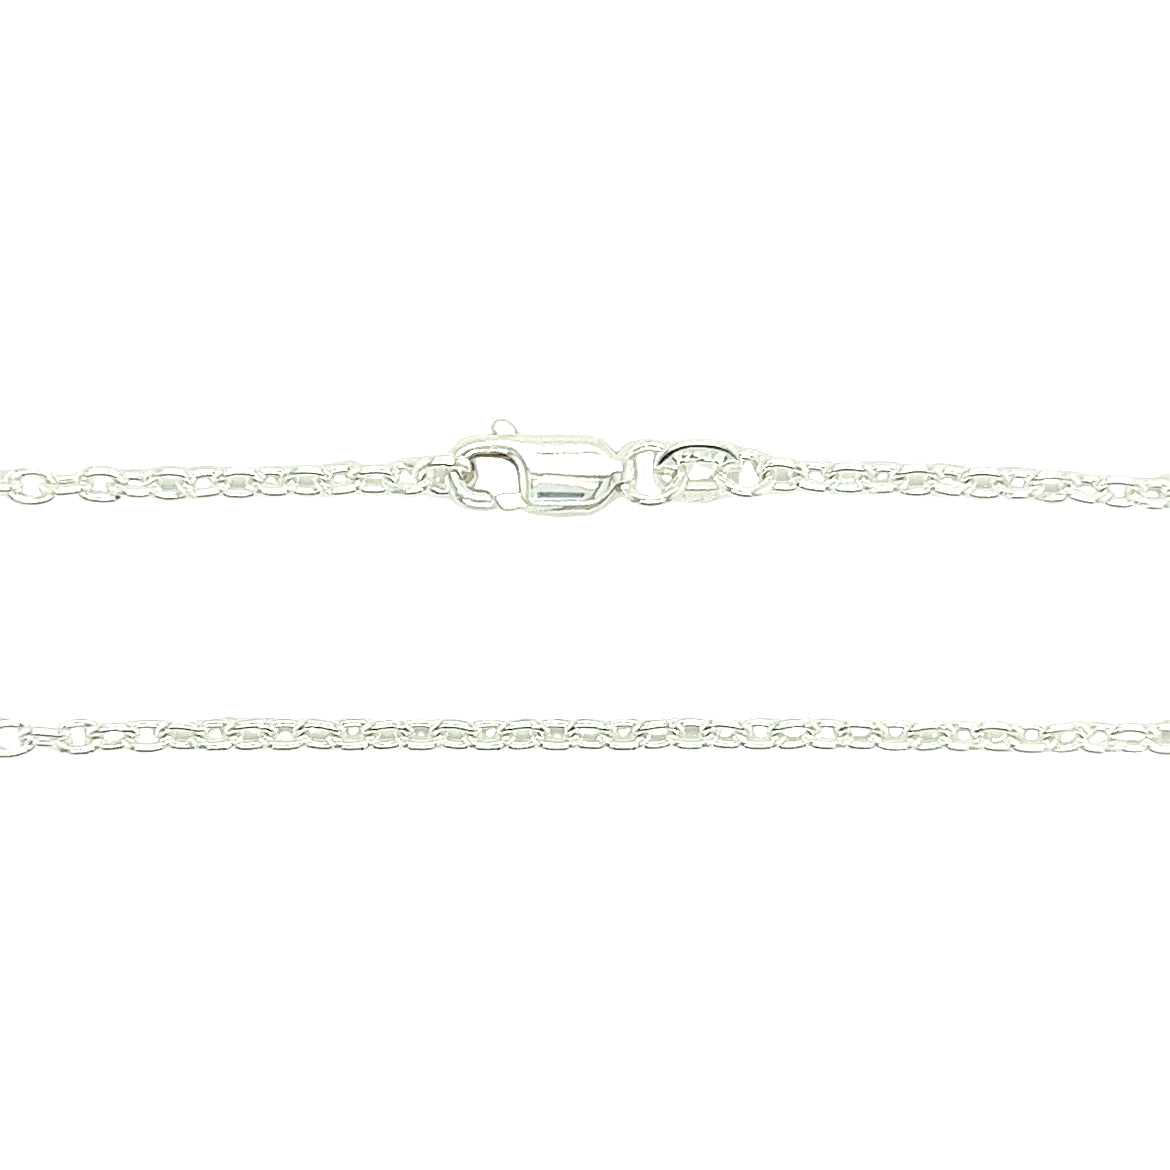 Cable Chain 2.25mm with 24in of Length in Sterling Silver Chain and Clasp View